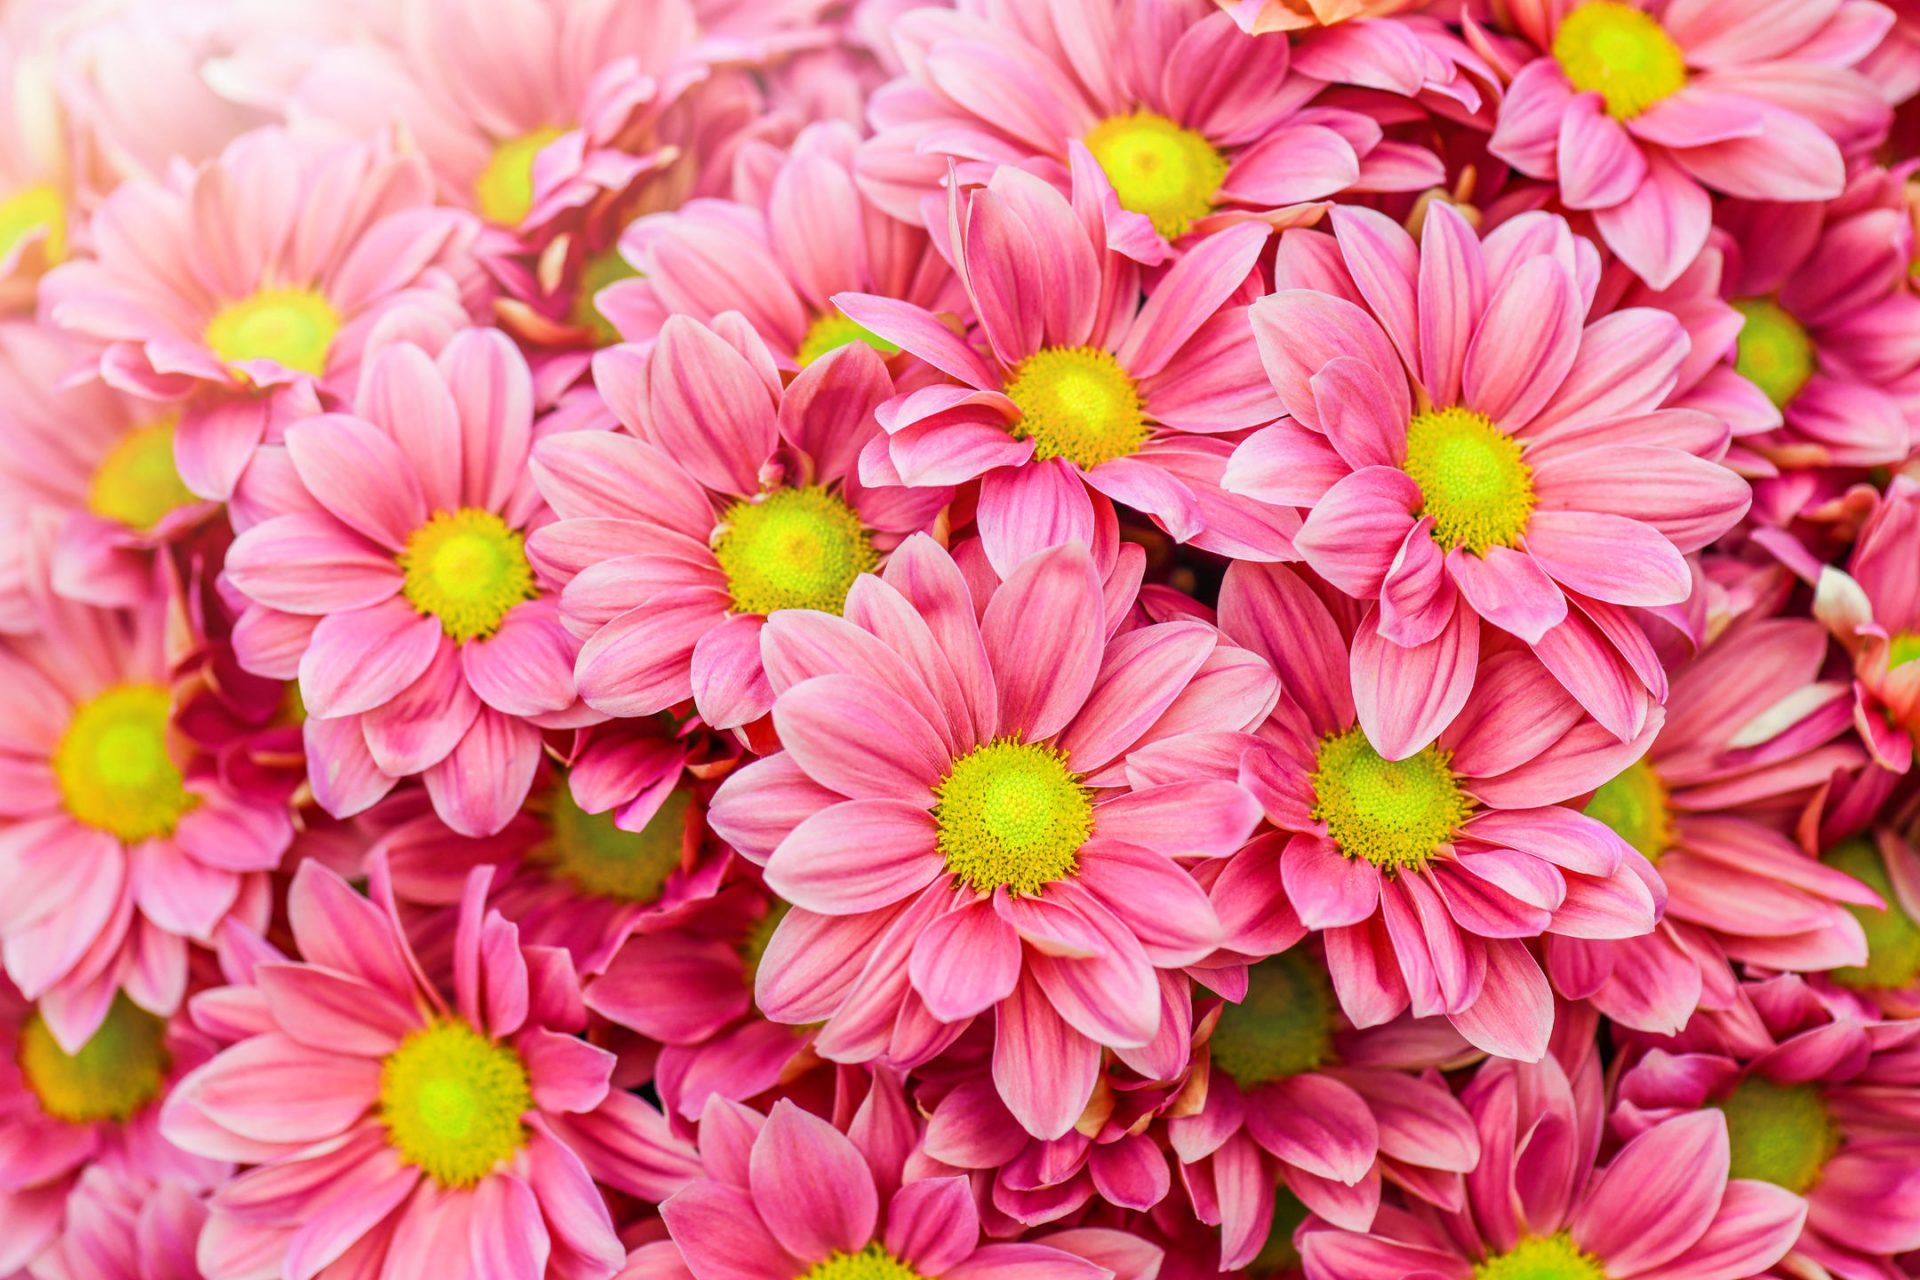 Pictures of pink daisies - Types of Daisies: 27 Types + Pictures.